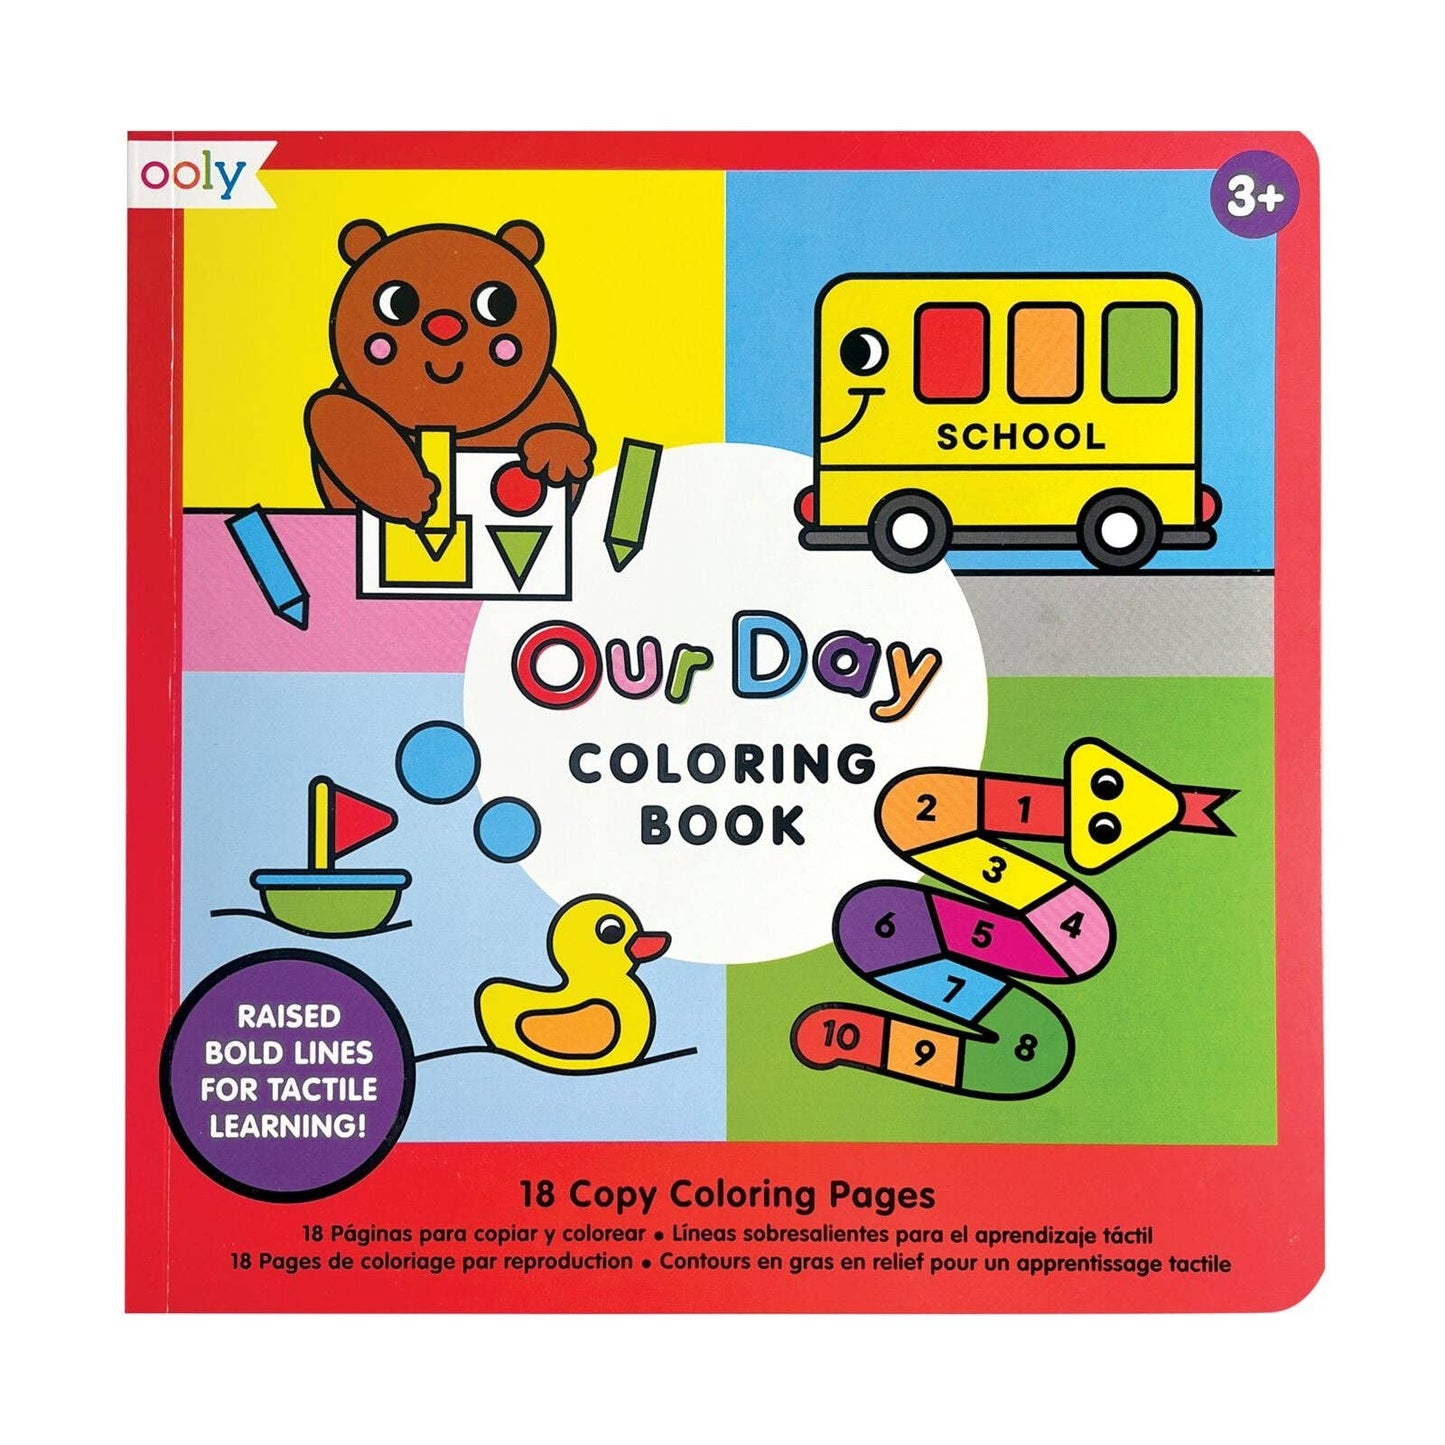 OOLY - Our Day Copy Coloring Book (7.8" x 7.8")